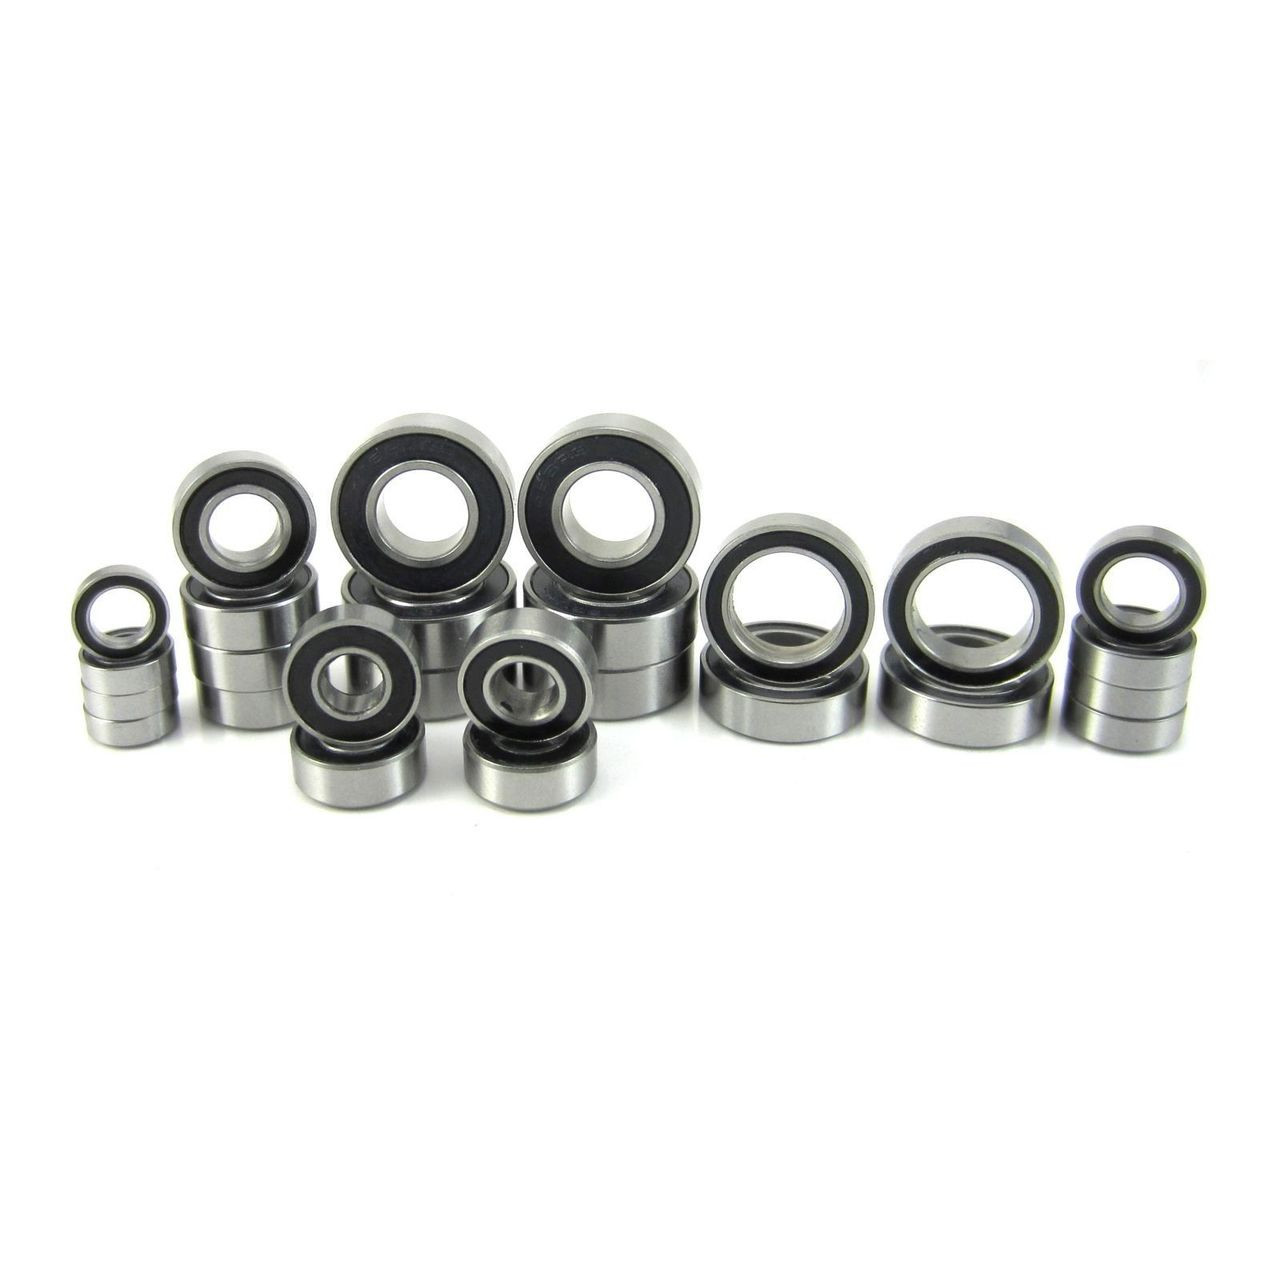 TRB RC Precision Ball Bearing Kit (26) Rubber Sealed Tekno RC SCT410 4WD SC